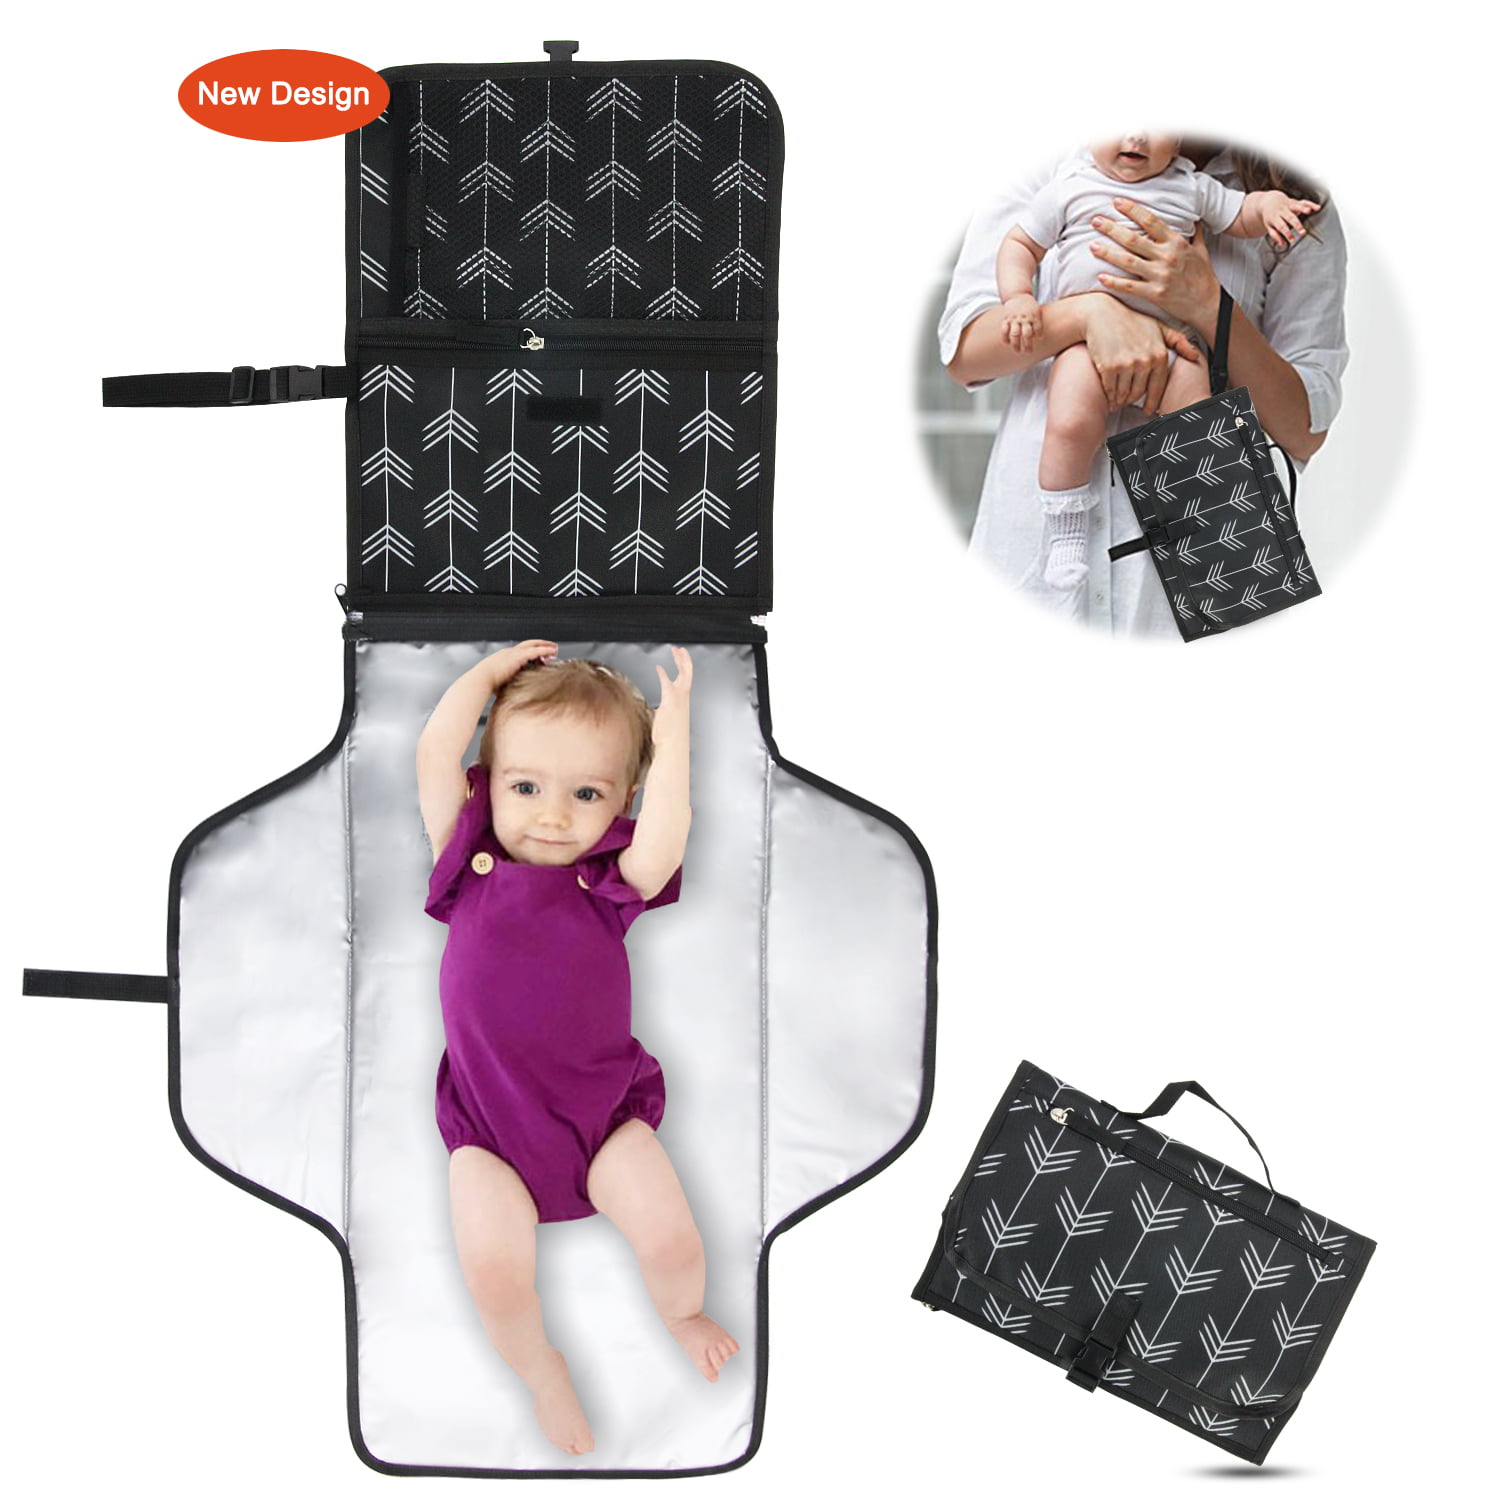 DISPOSABLE/TRAVEL BABY CHANGING PLACE MAT-OUT AND ABOUT-BABY BAG ESSENTIAL 